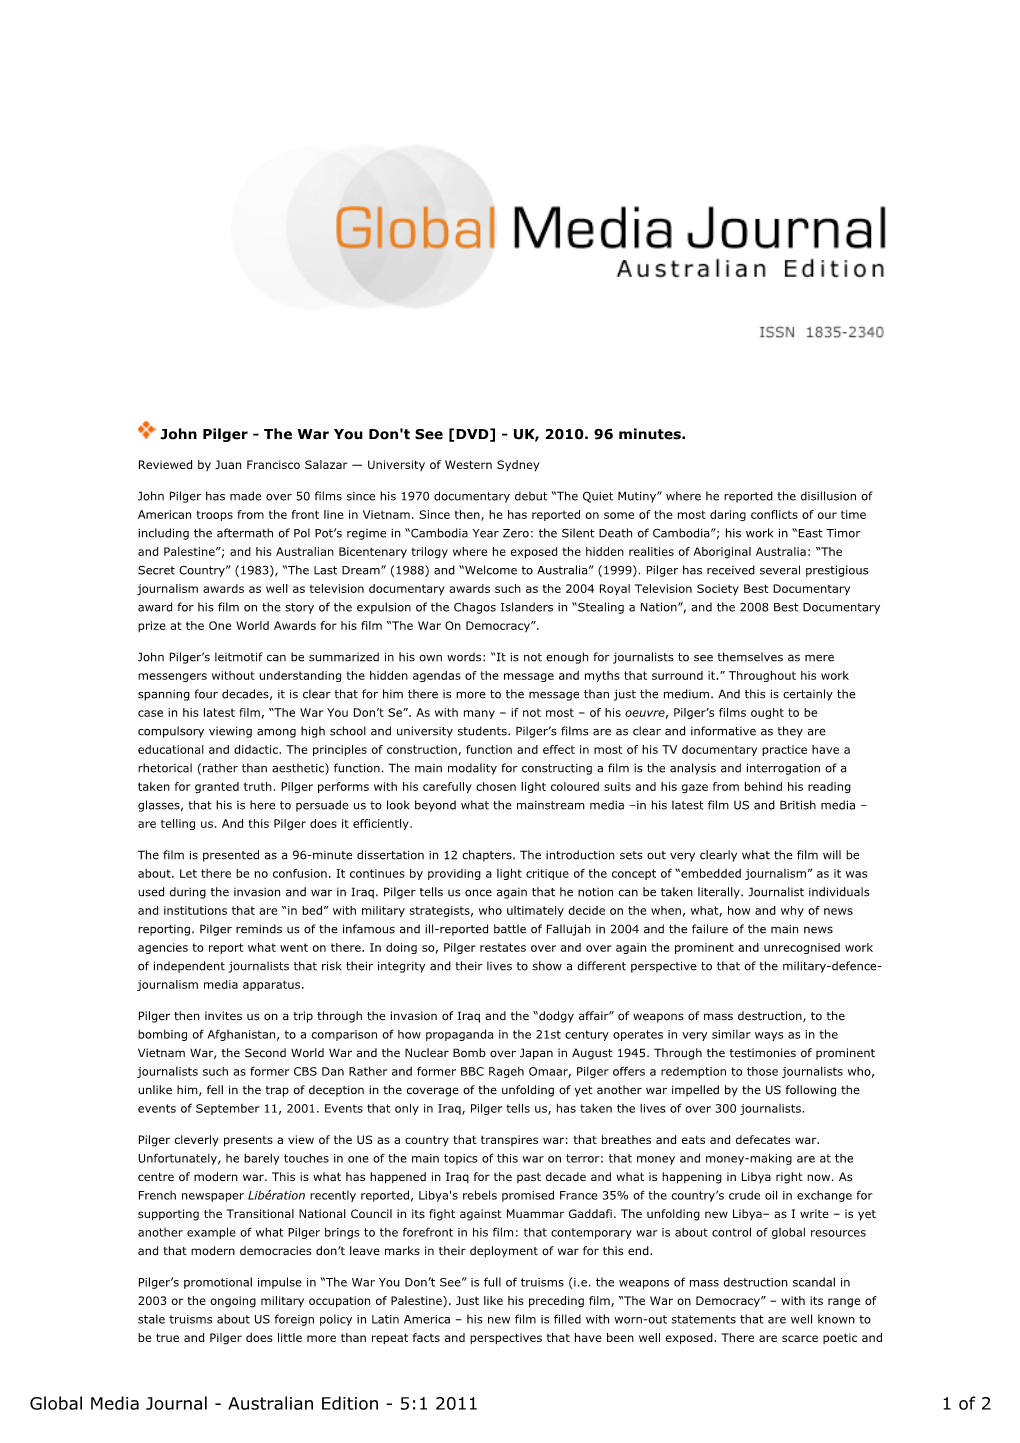 Global Media Journal - Australian Edition - 5:1 2011 1 of 2 Expressive Elements in “The War You Don’T See”